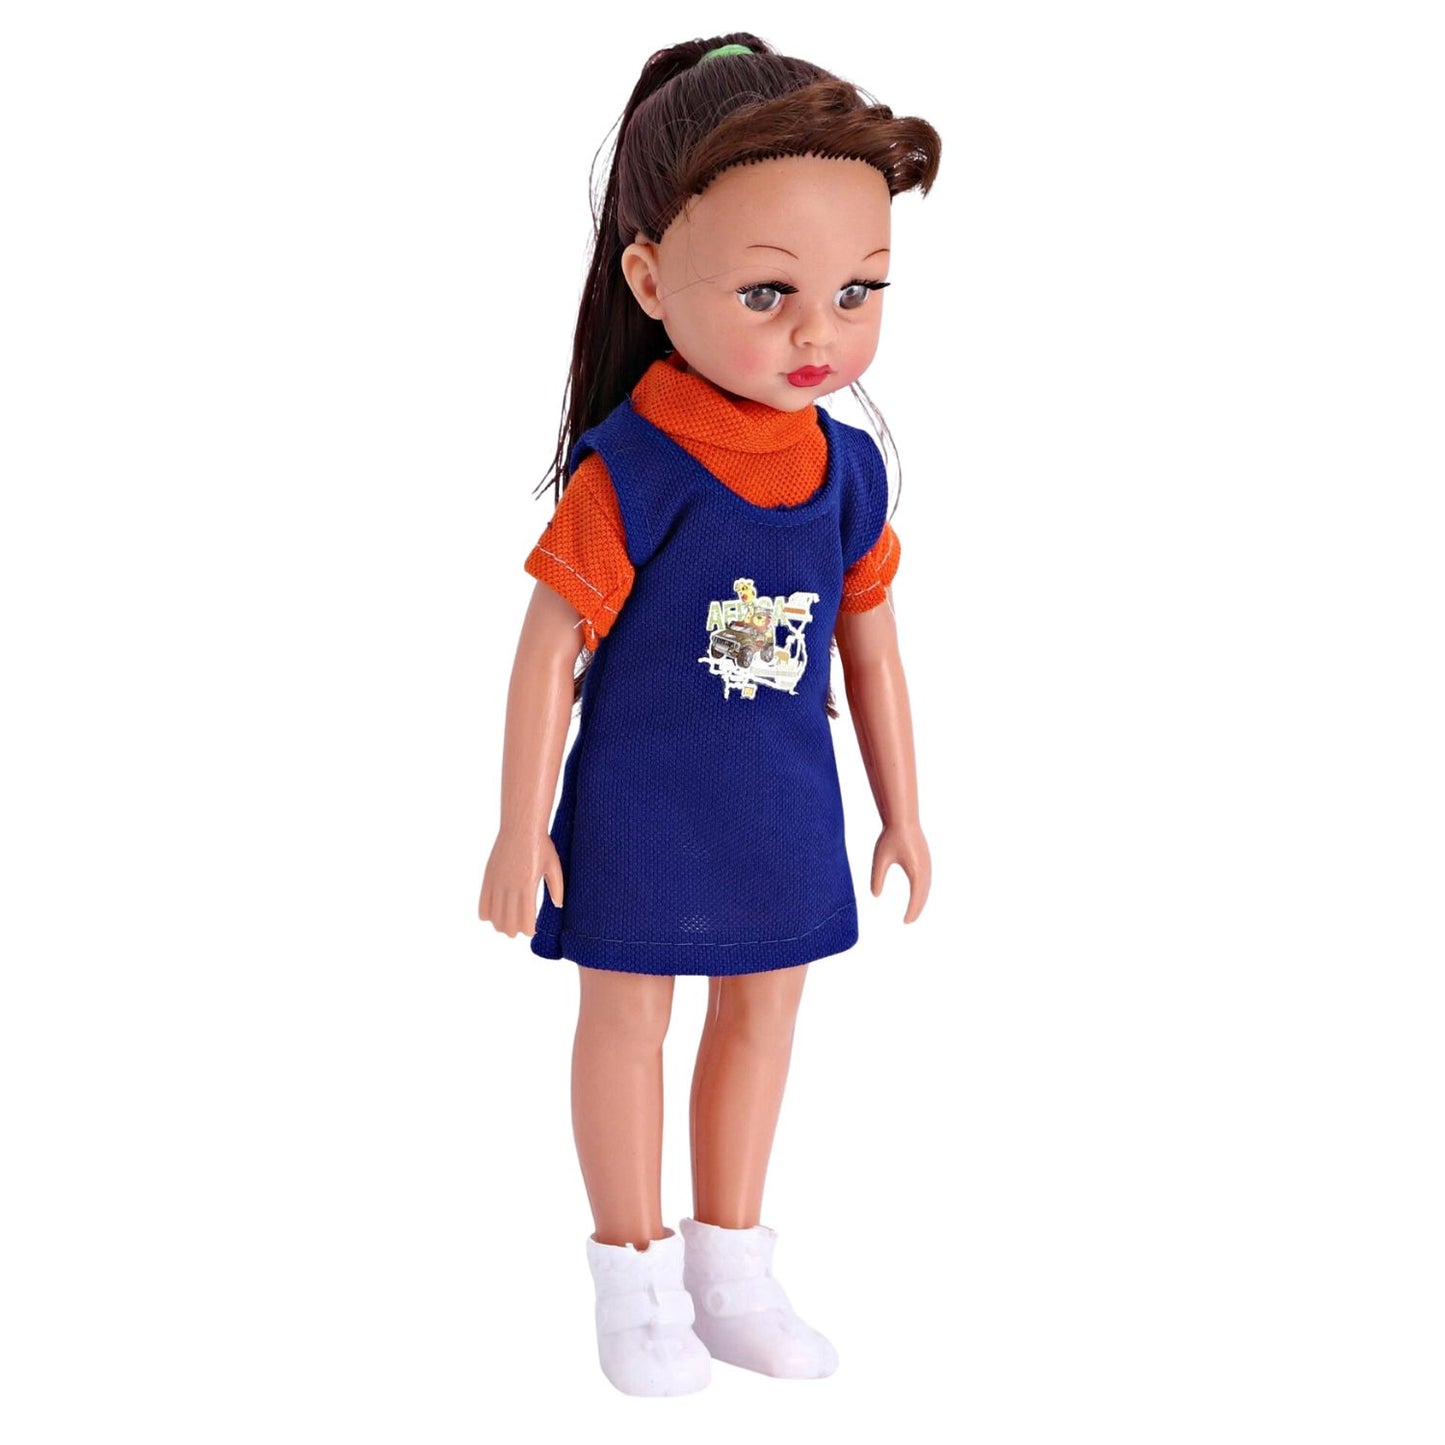 Speedage Khushi 30.5cm Fashion Doll, Model Perfect Gift for 3-8 year Girls, Chic Design - Assorted Dress Colors & Accessories